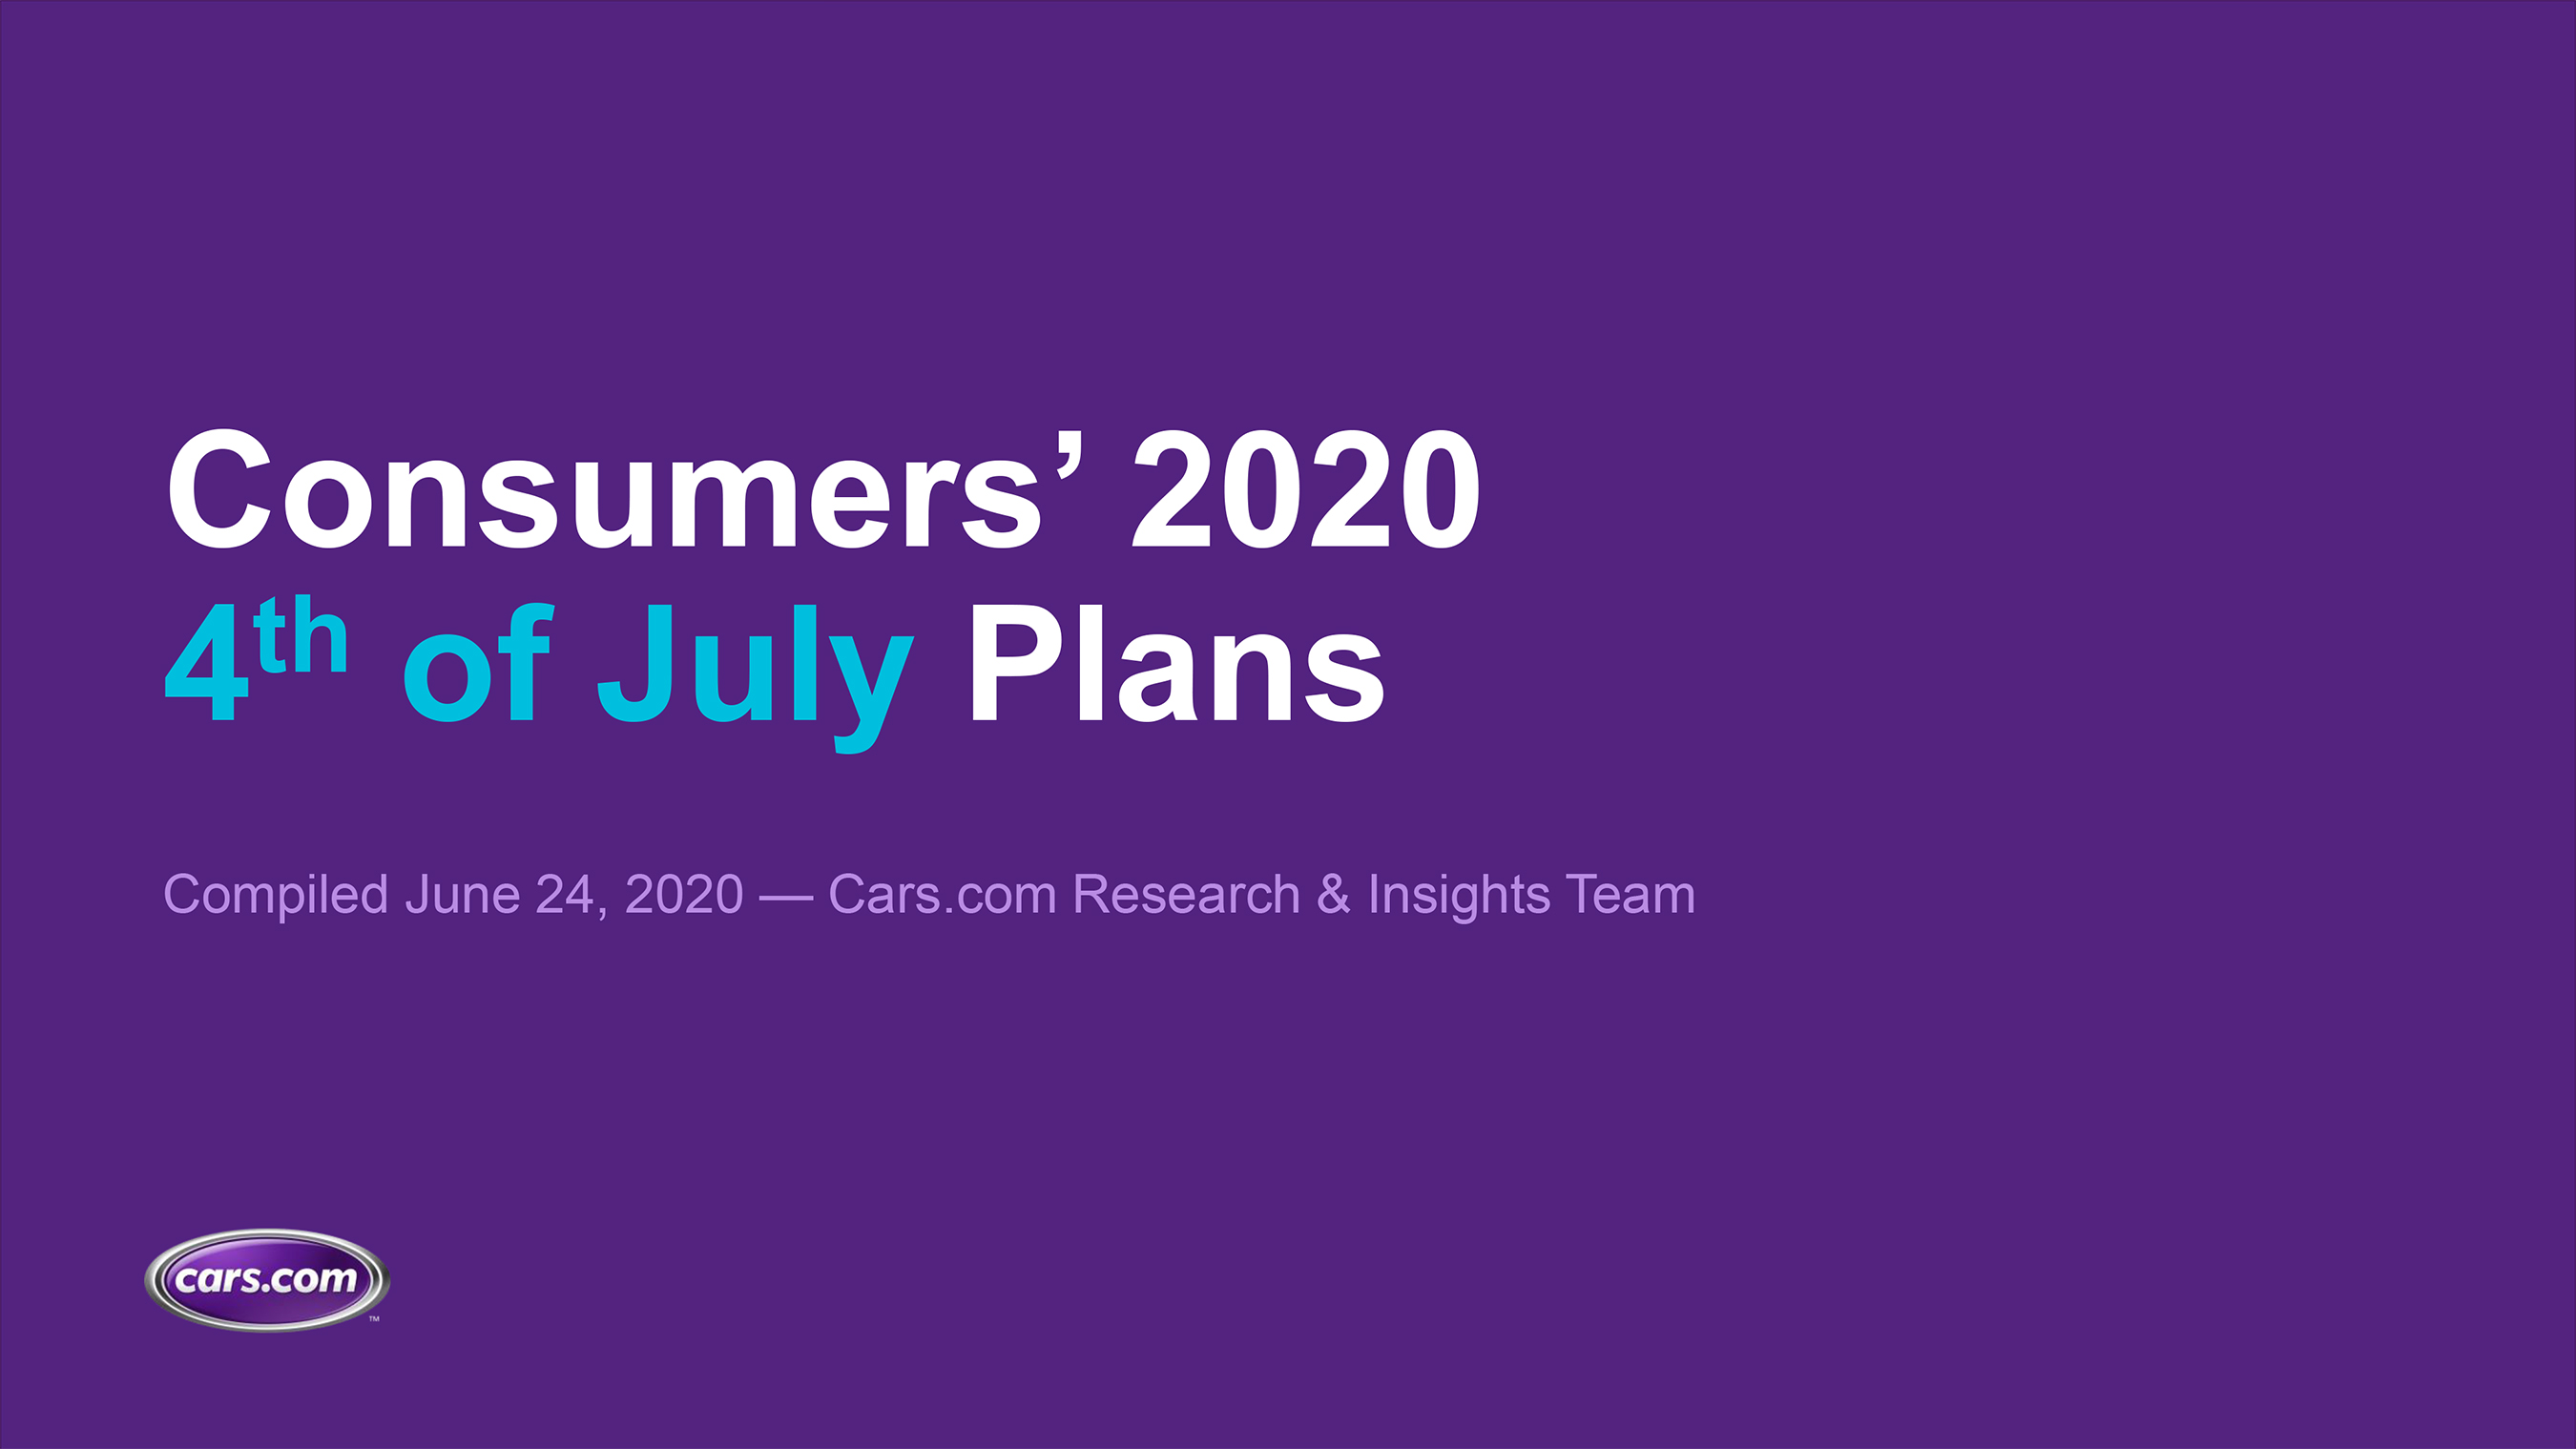 Consumers 2020 4th of July Plans